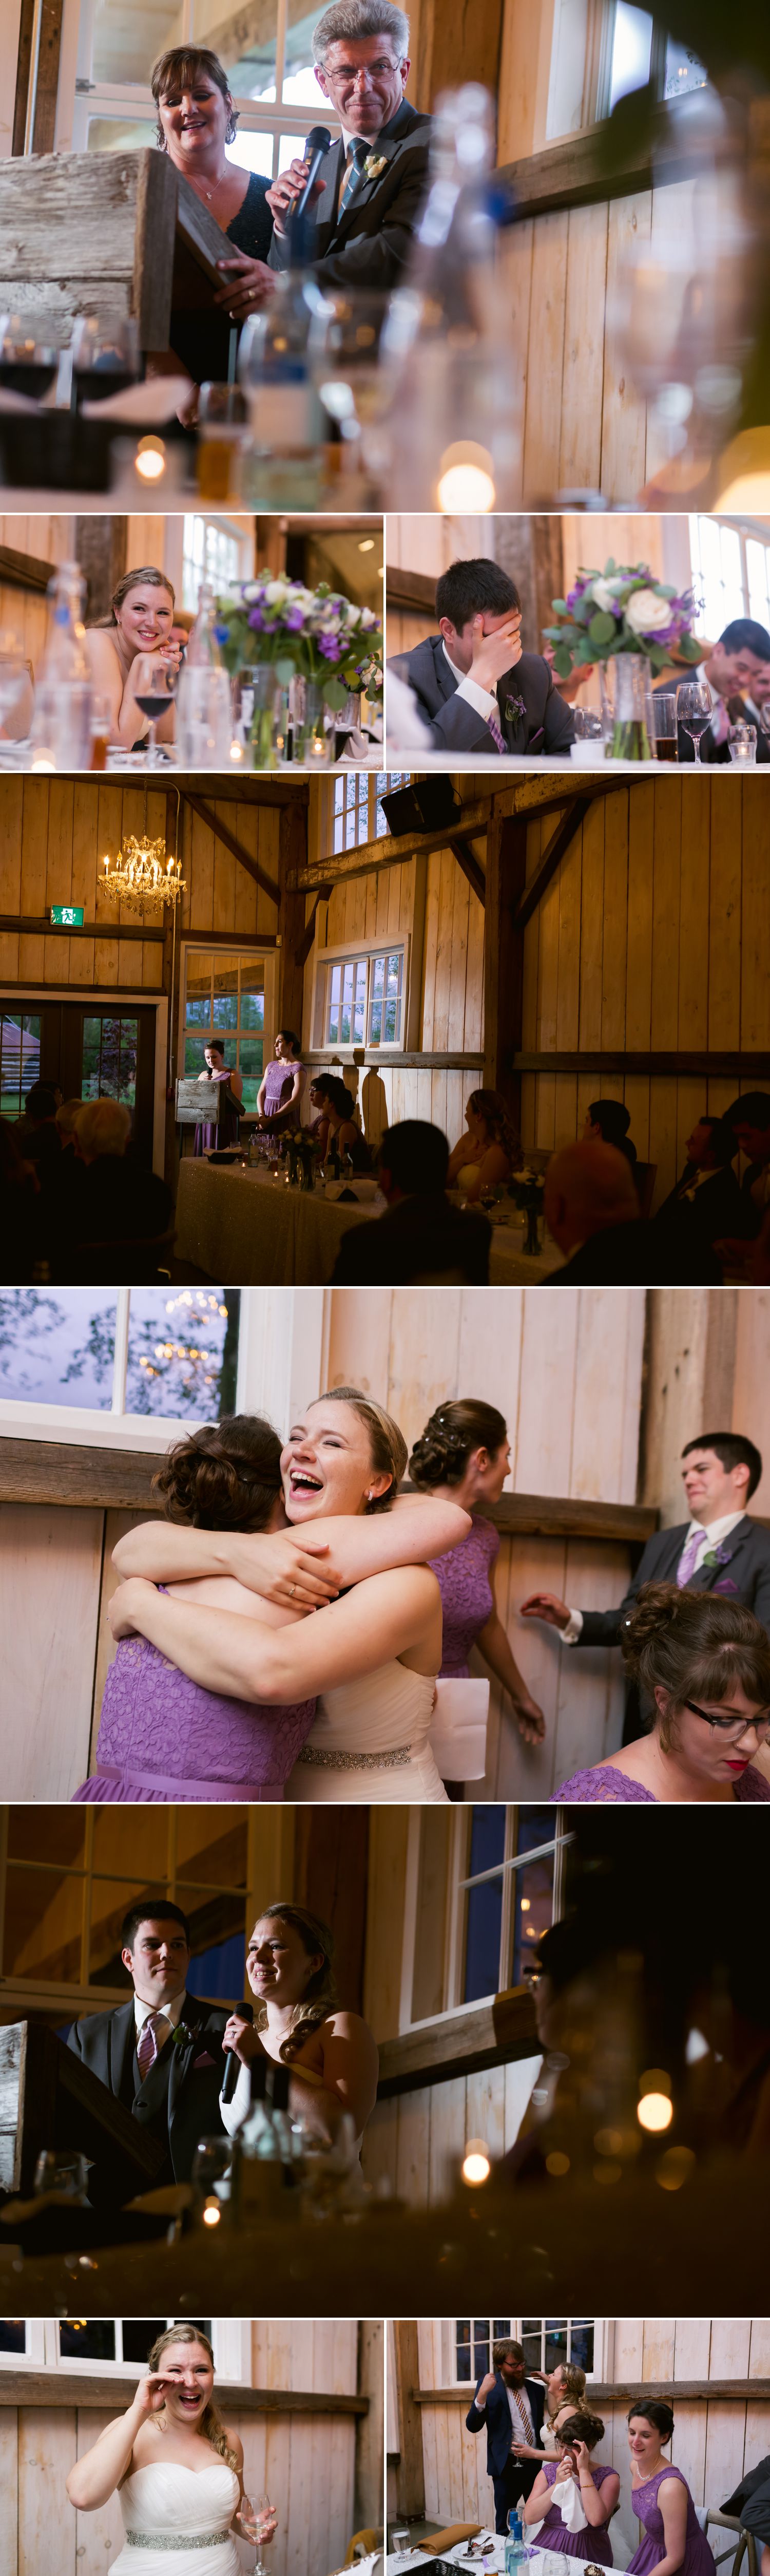 The bride and groom enjoying speeches by friends and family during their reception in the Stonefields loft